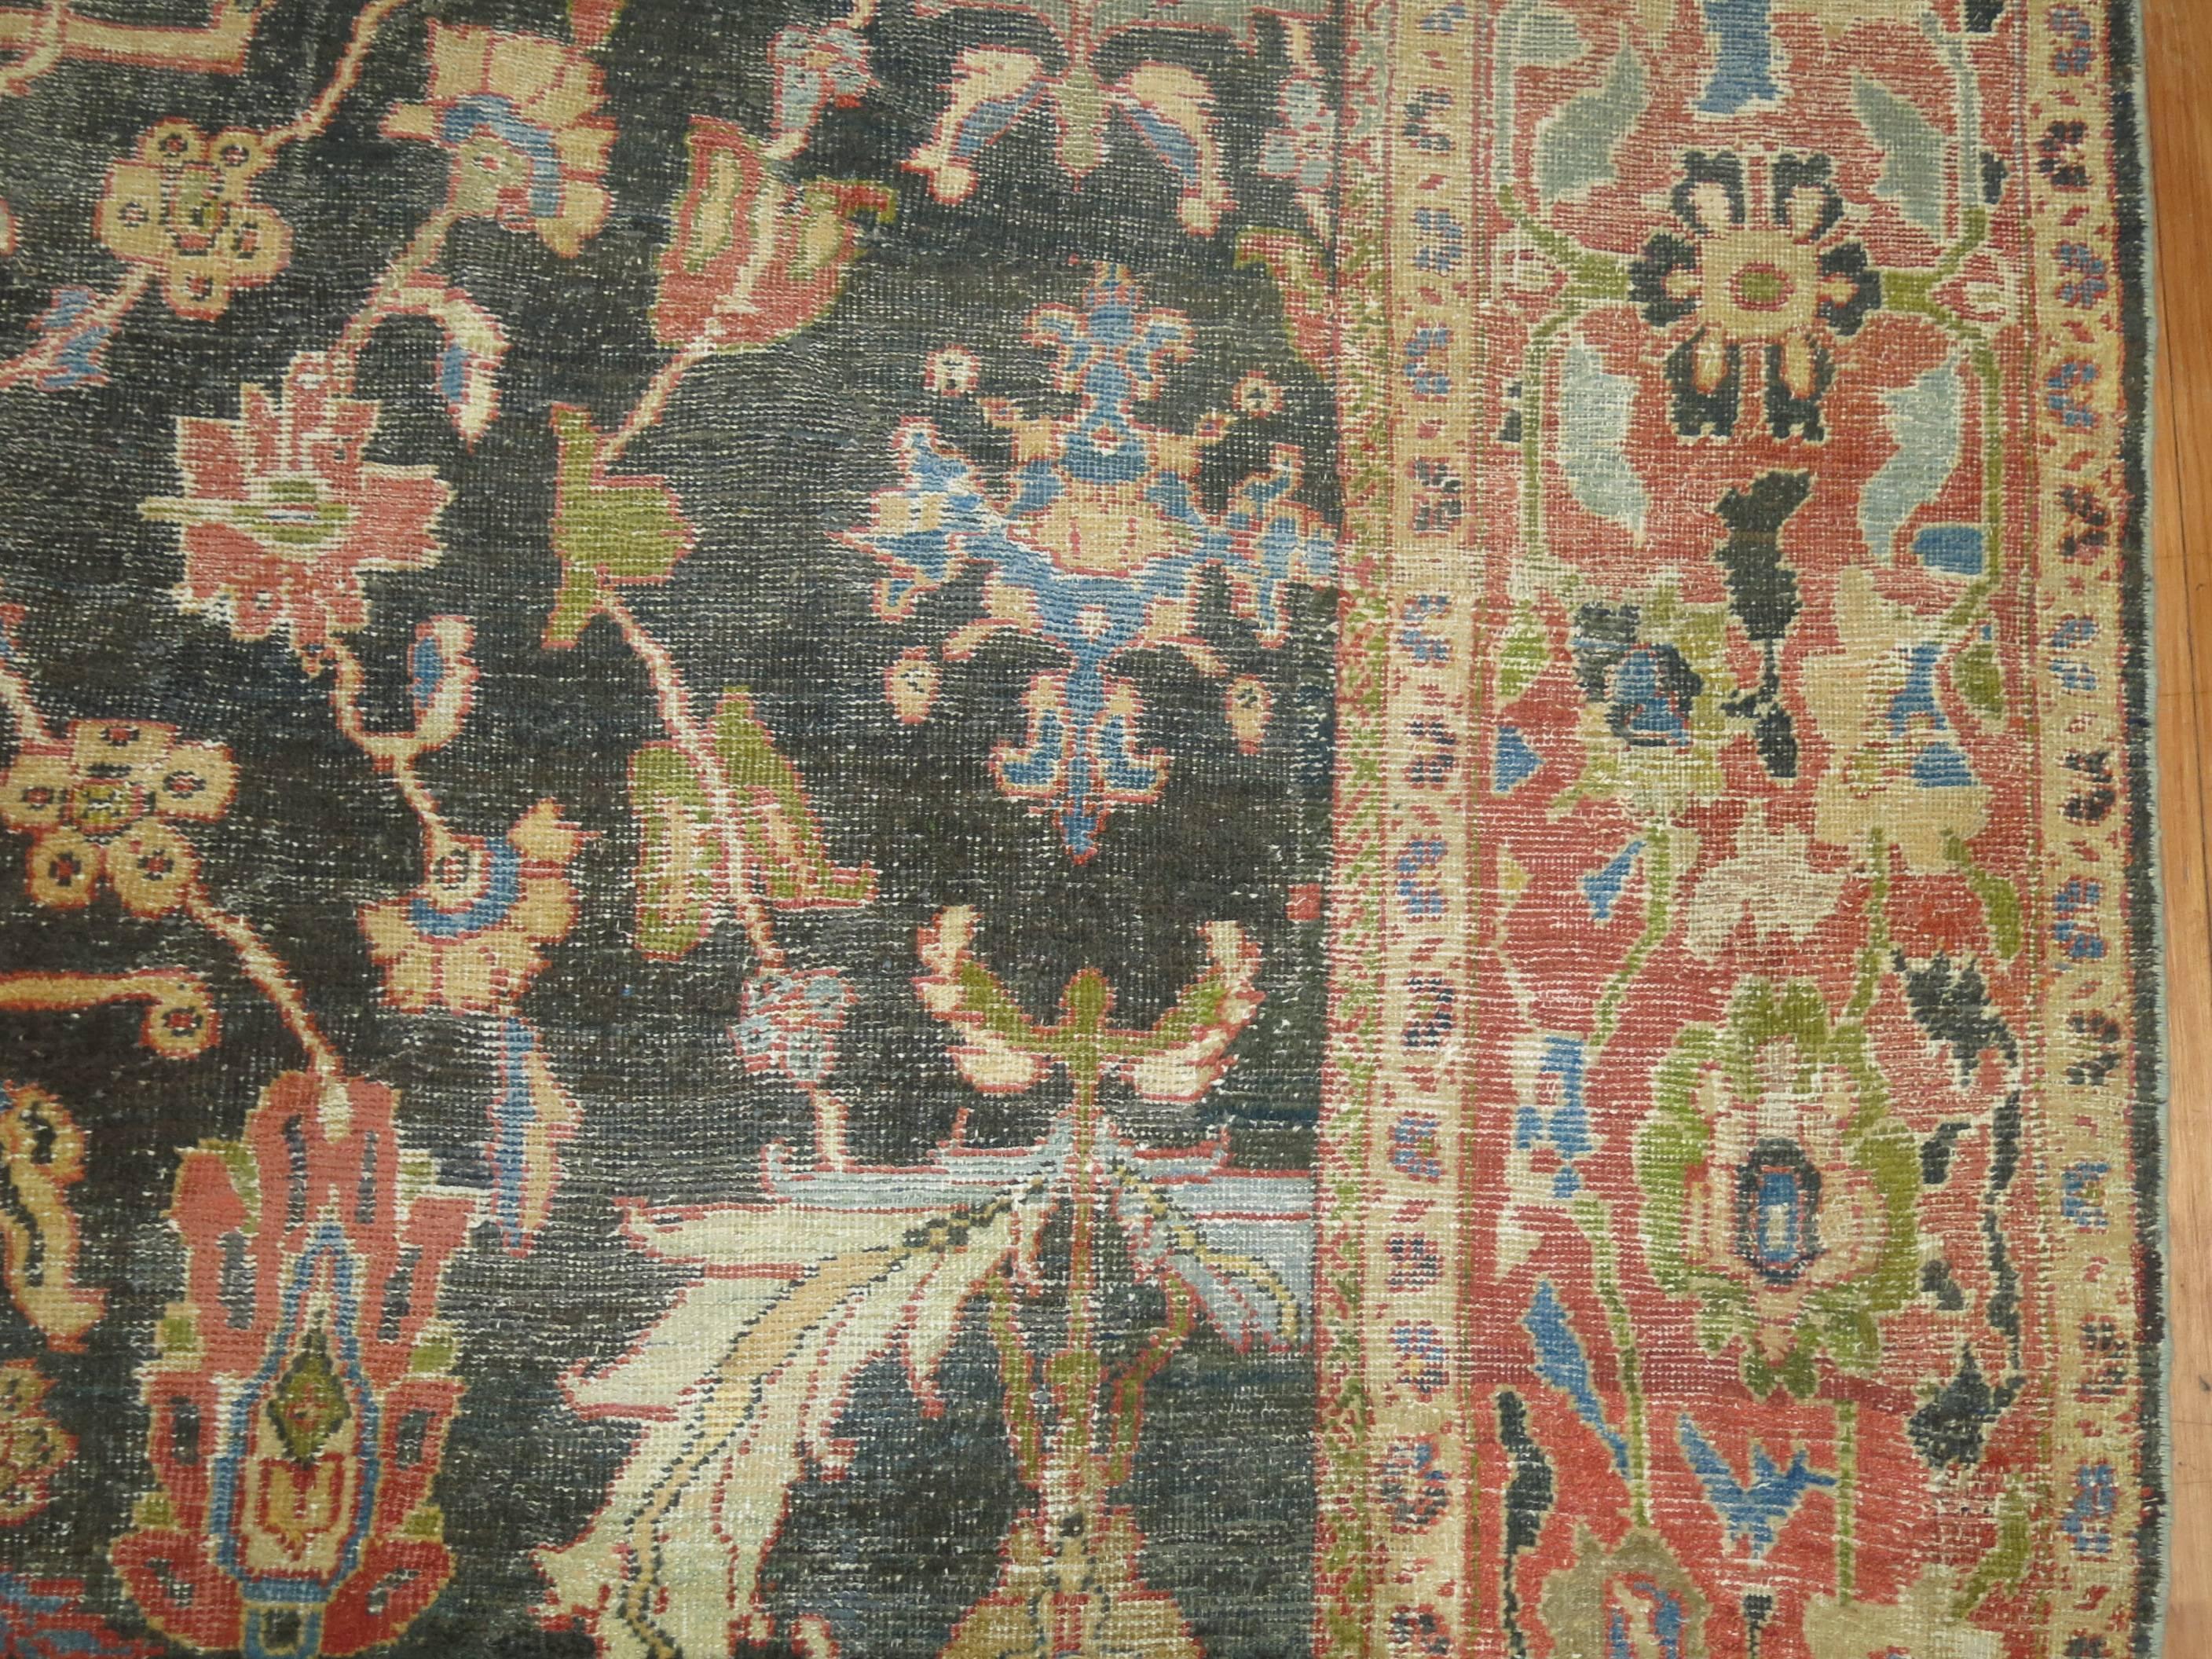 Late 19th-early 20th century one of a kind Persian Sultanabad carpet with great color combination and the perfect patina and texture.